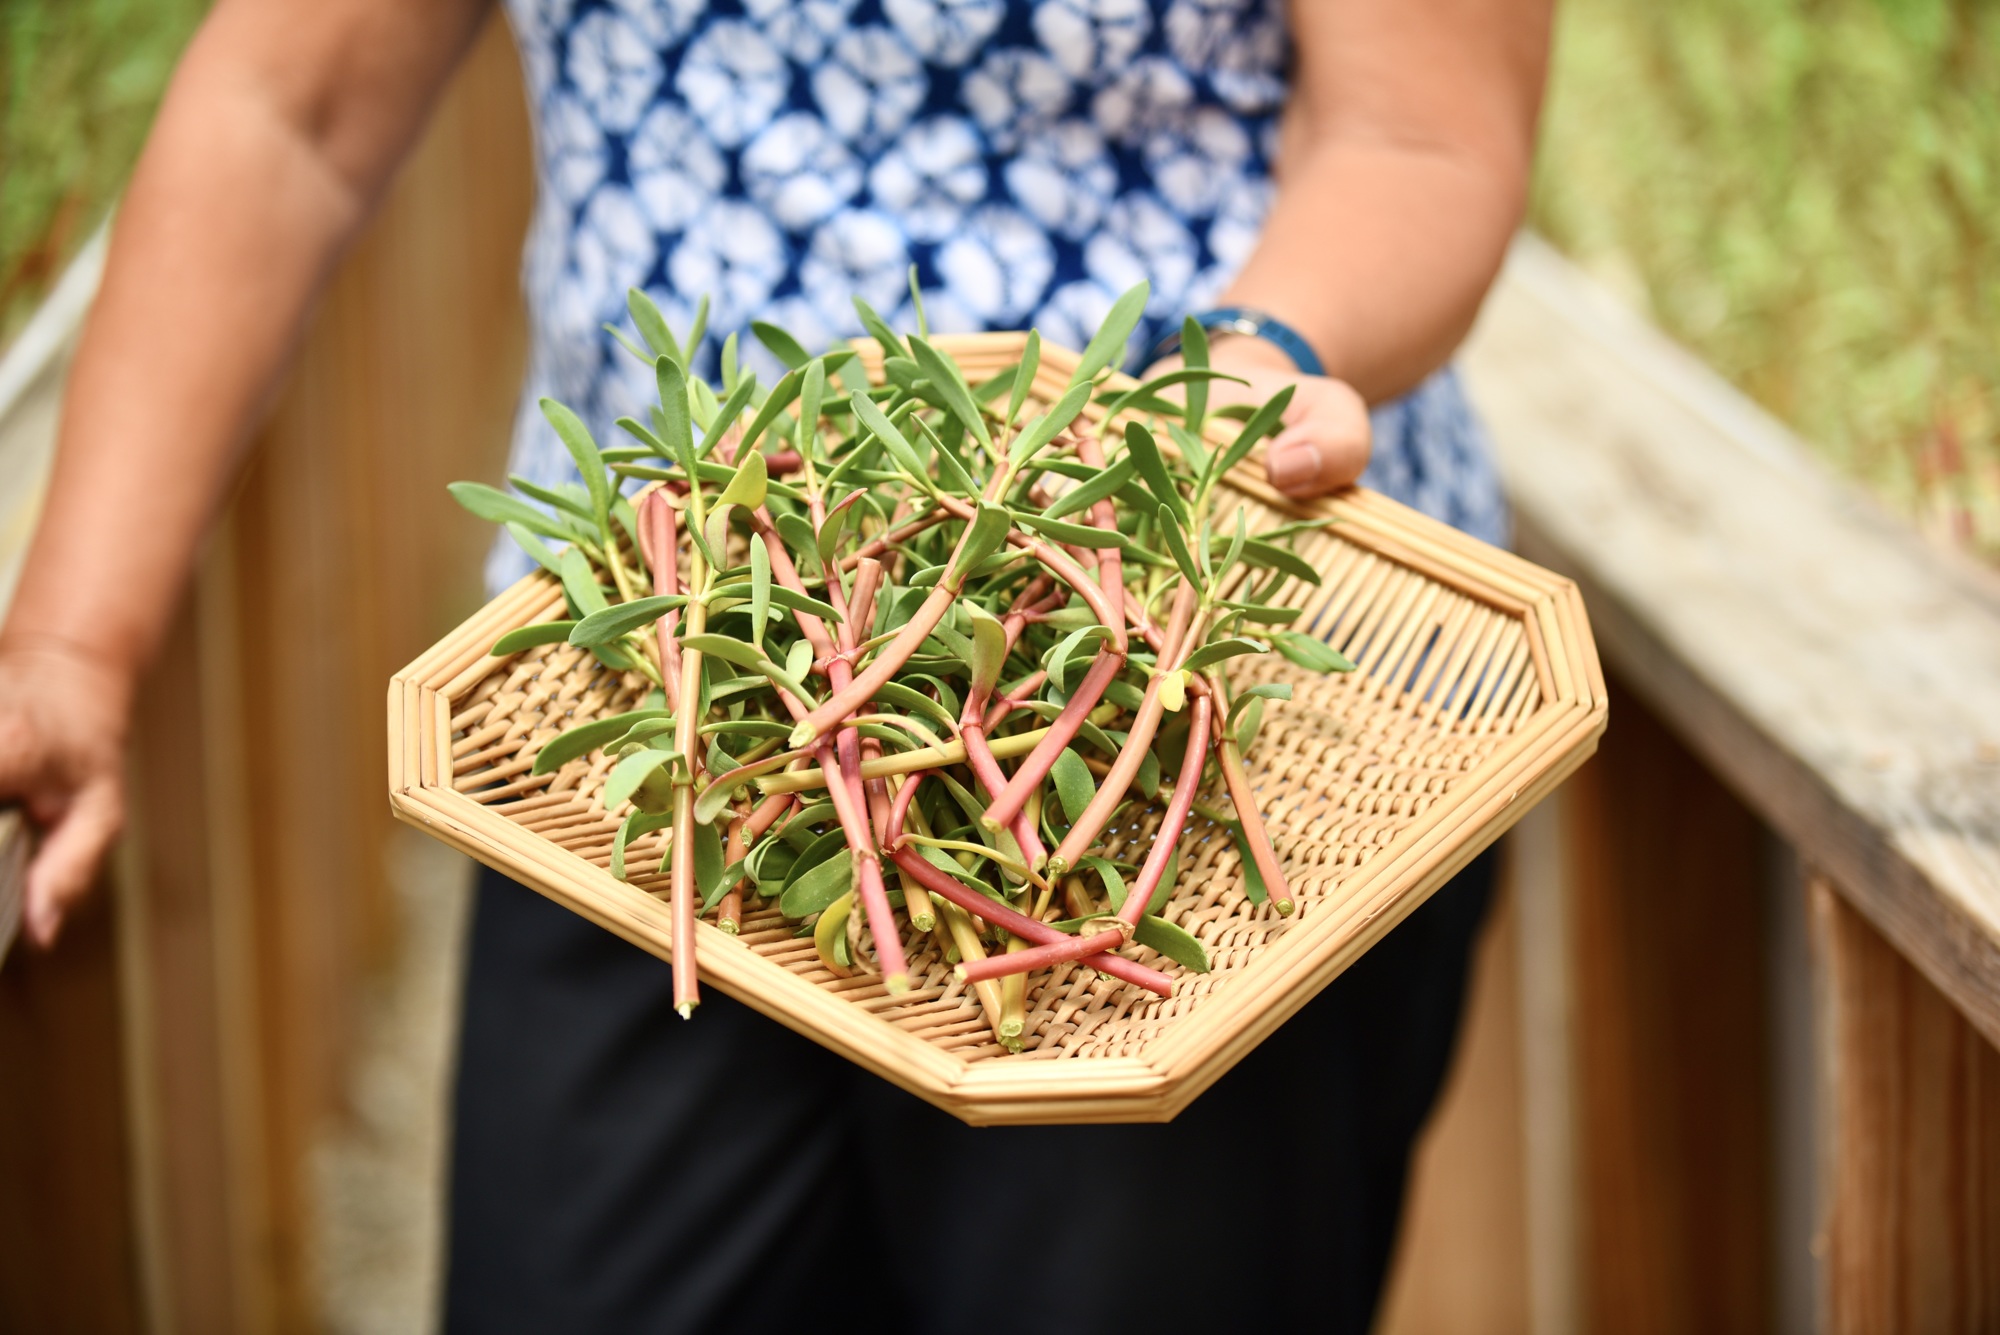 Mote has been hydroponically farming sea purslane for seven years. The salty sea crop is one of Main’s favorite edible plants.